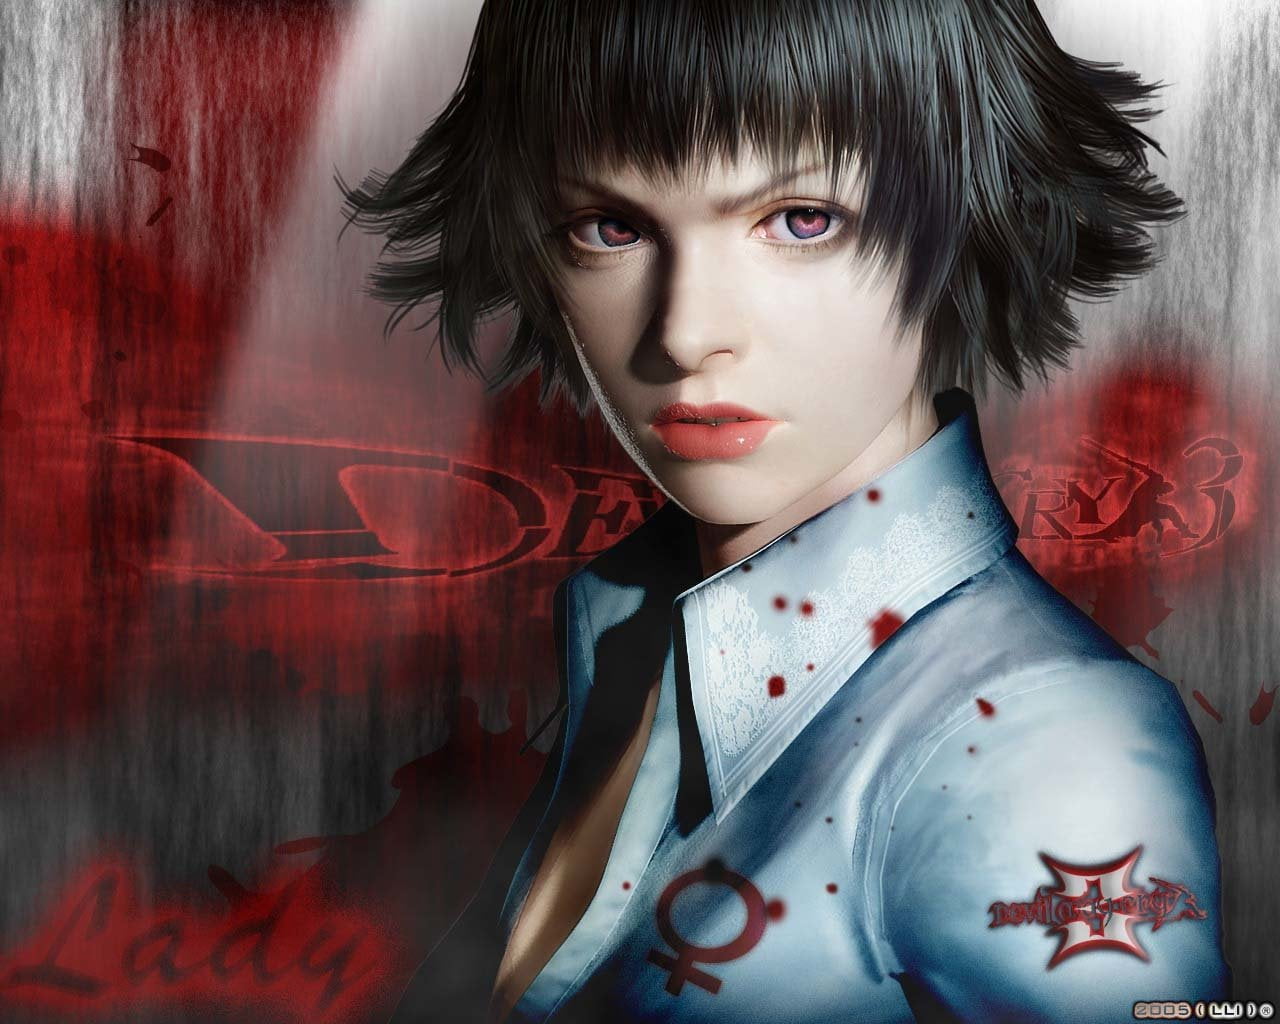 black-haired woman anime illustration, Devil May Cry, Devil May Cry 3: Dante's Awakening